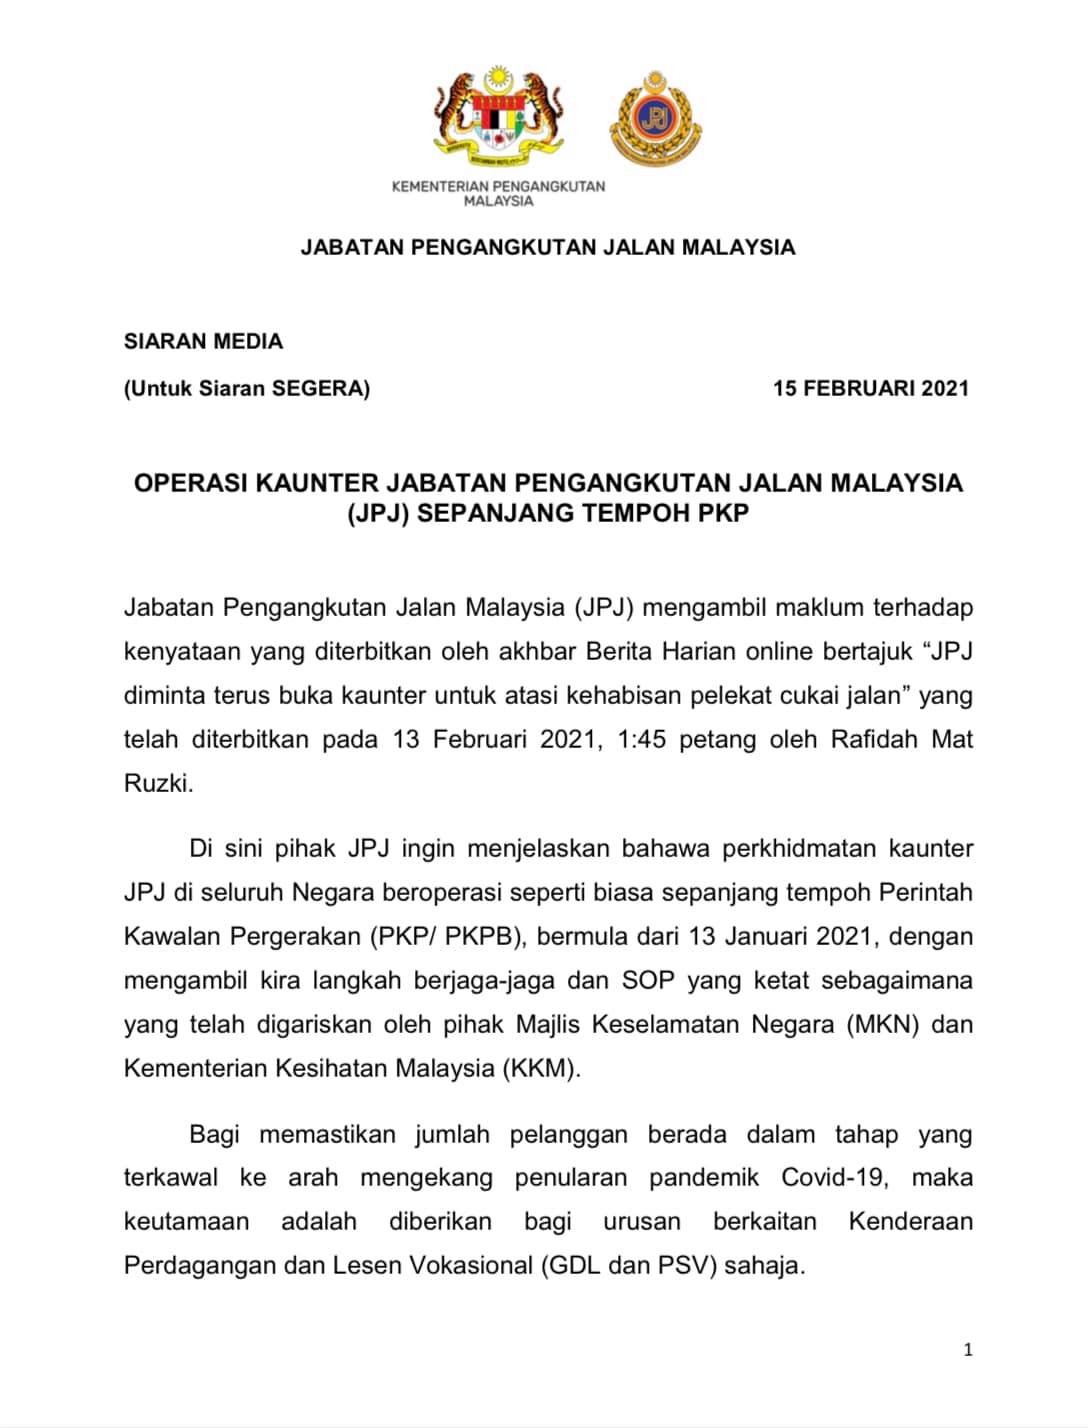 Appointment jpj